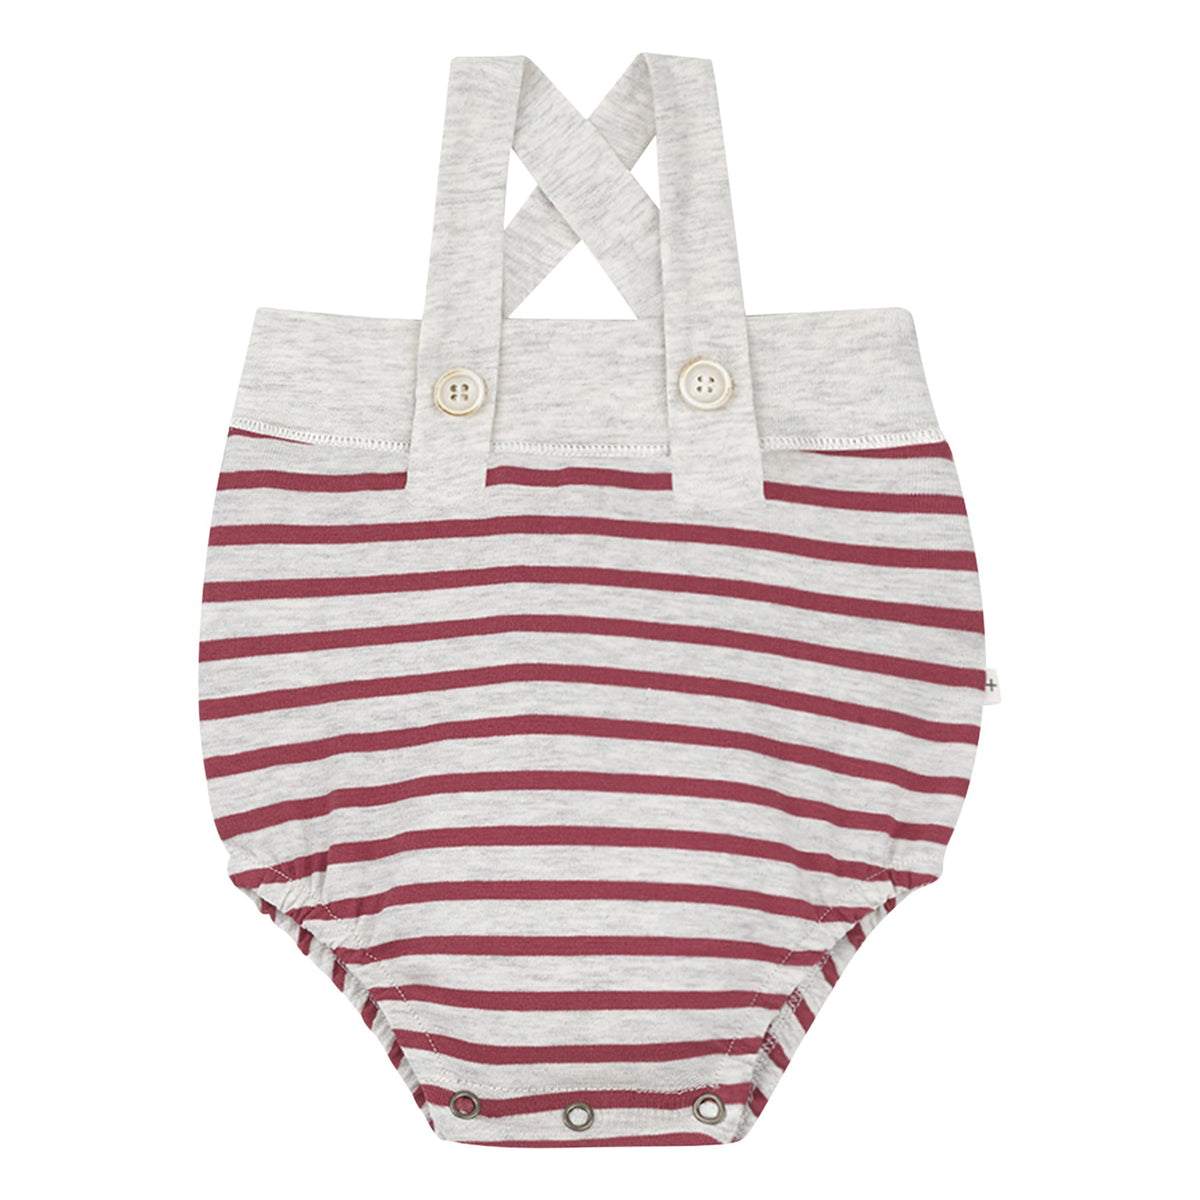 Red and white striped baby romper 